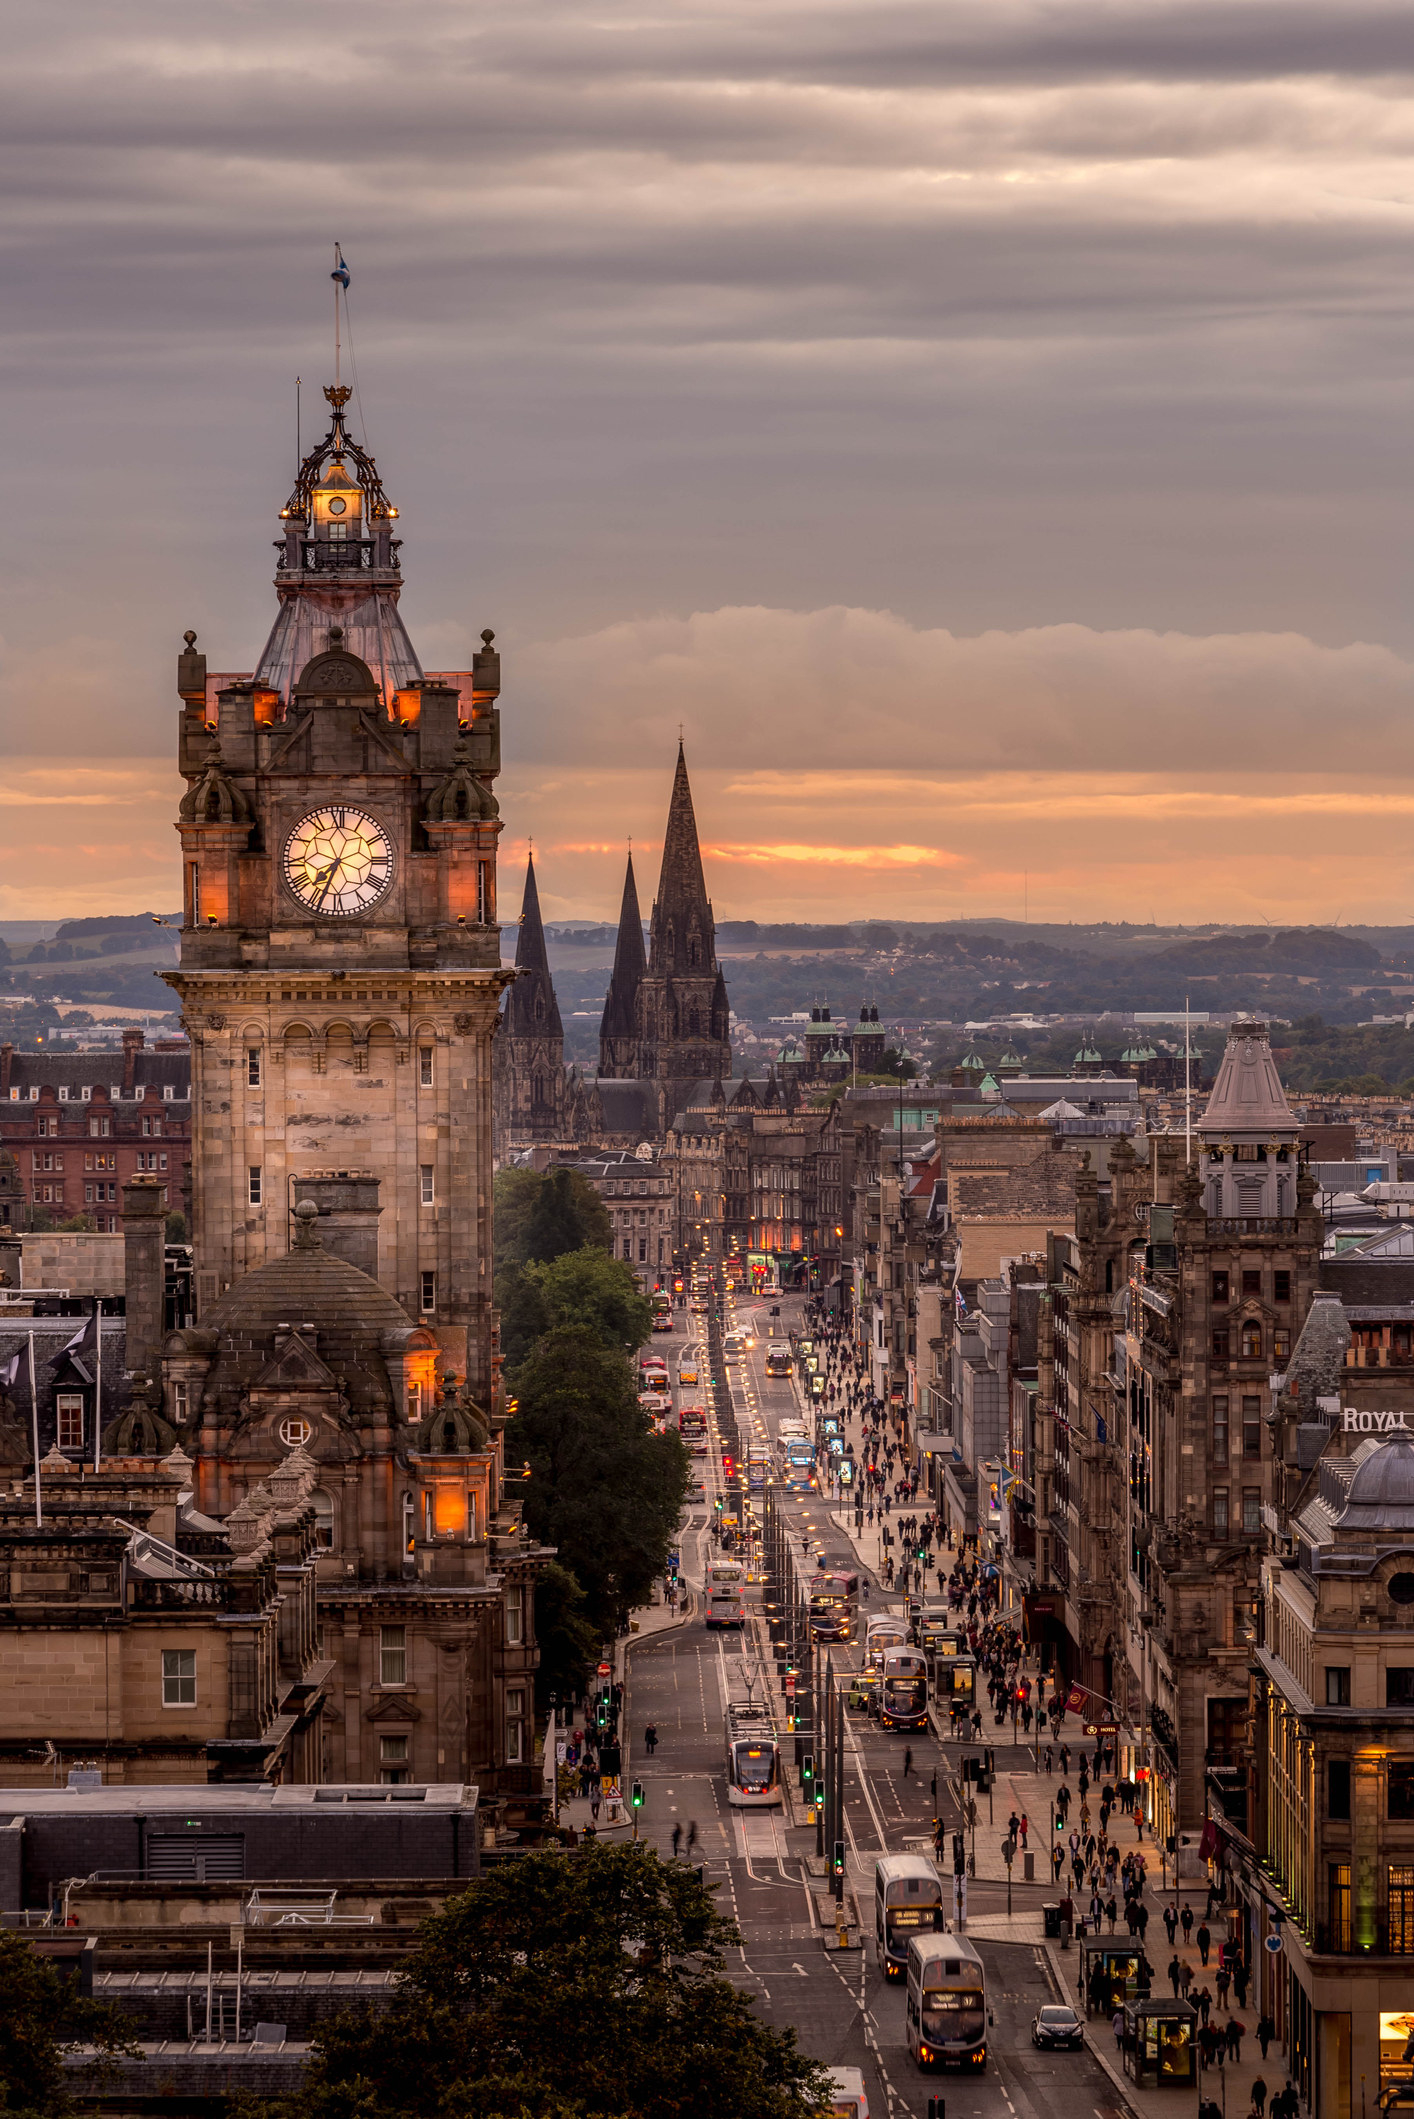 Royal Mile and clock tower under sunset